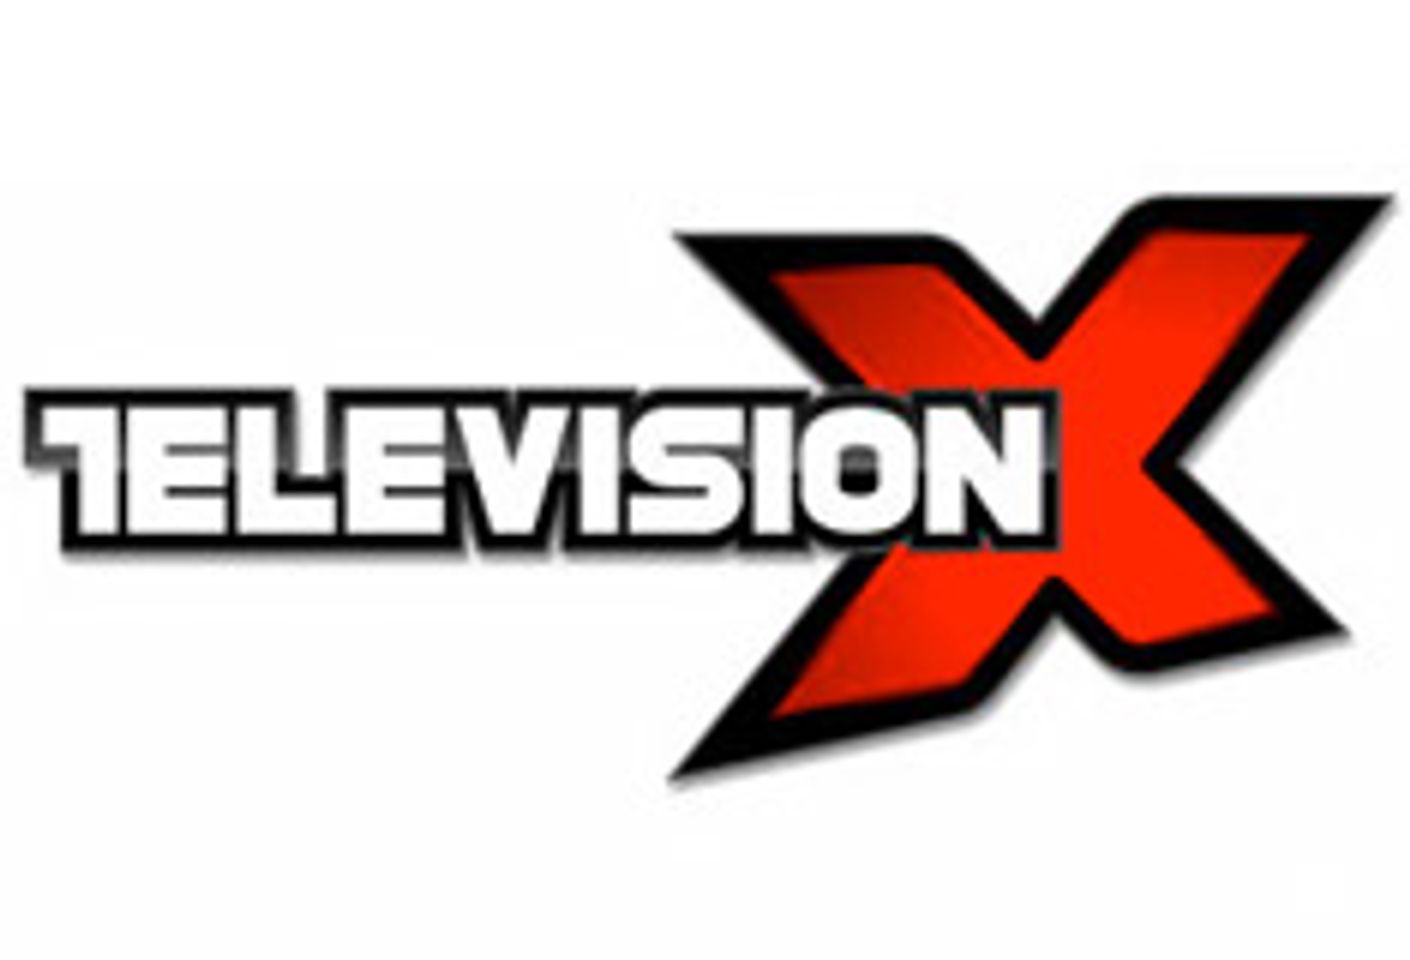 'Weird Science XXX' Earns Television X Its First AVN Awards Nom